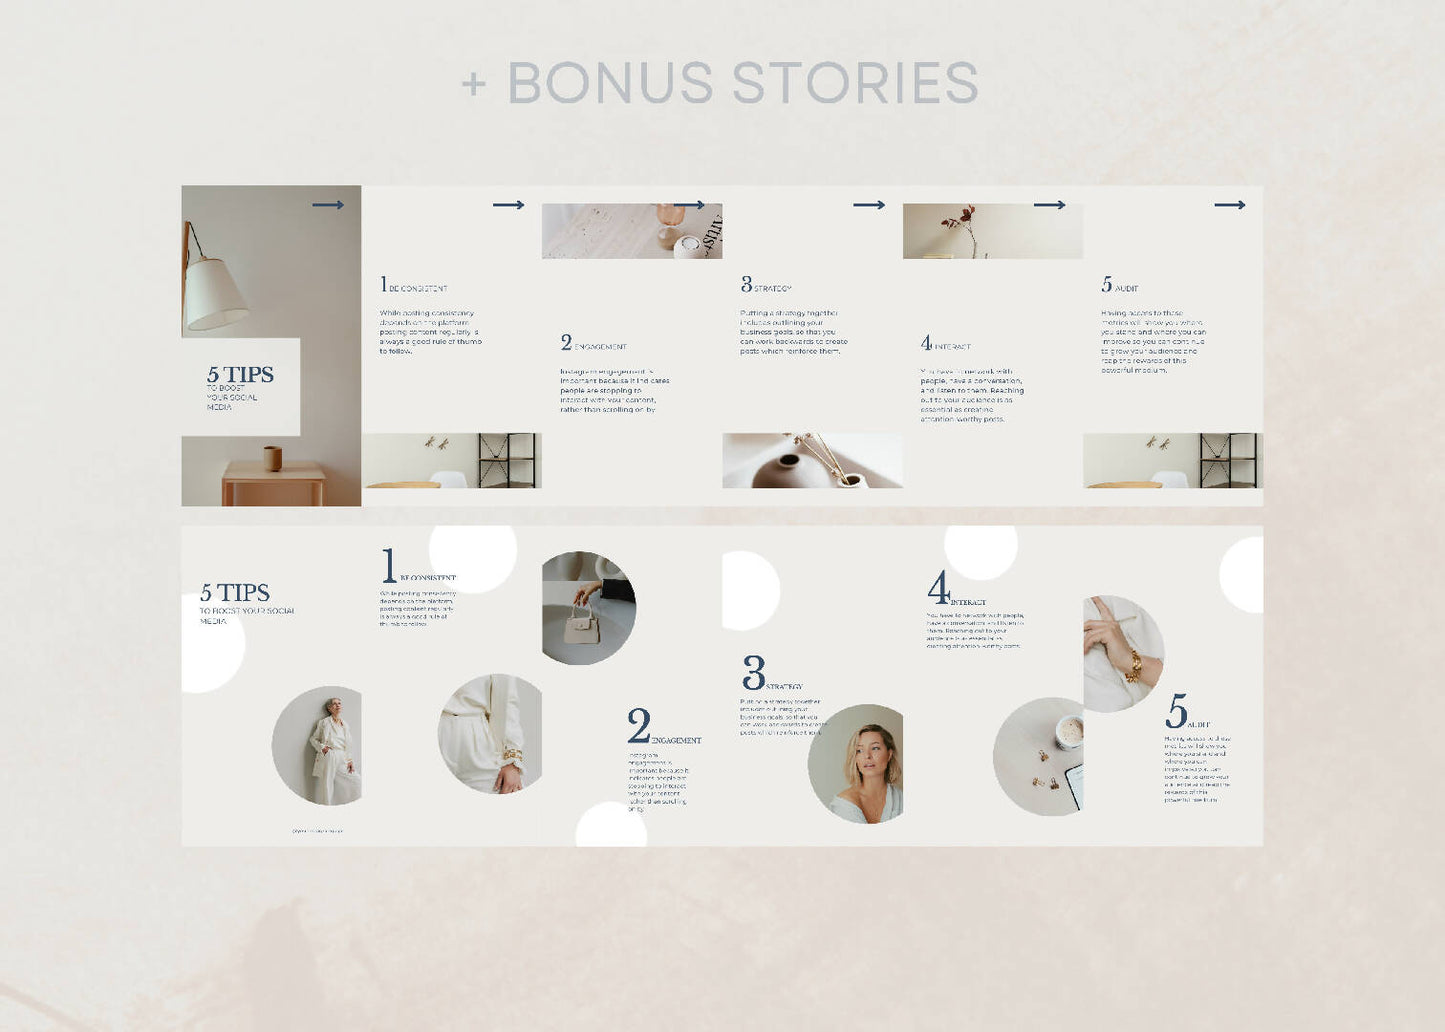 Instagram Multipurpose Canva Carousel Template Bundle. Best for Coaching, Fashion, Social Media Management and Wellness.